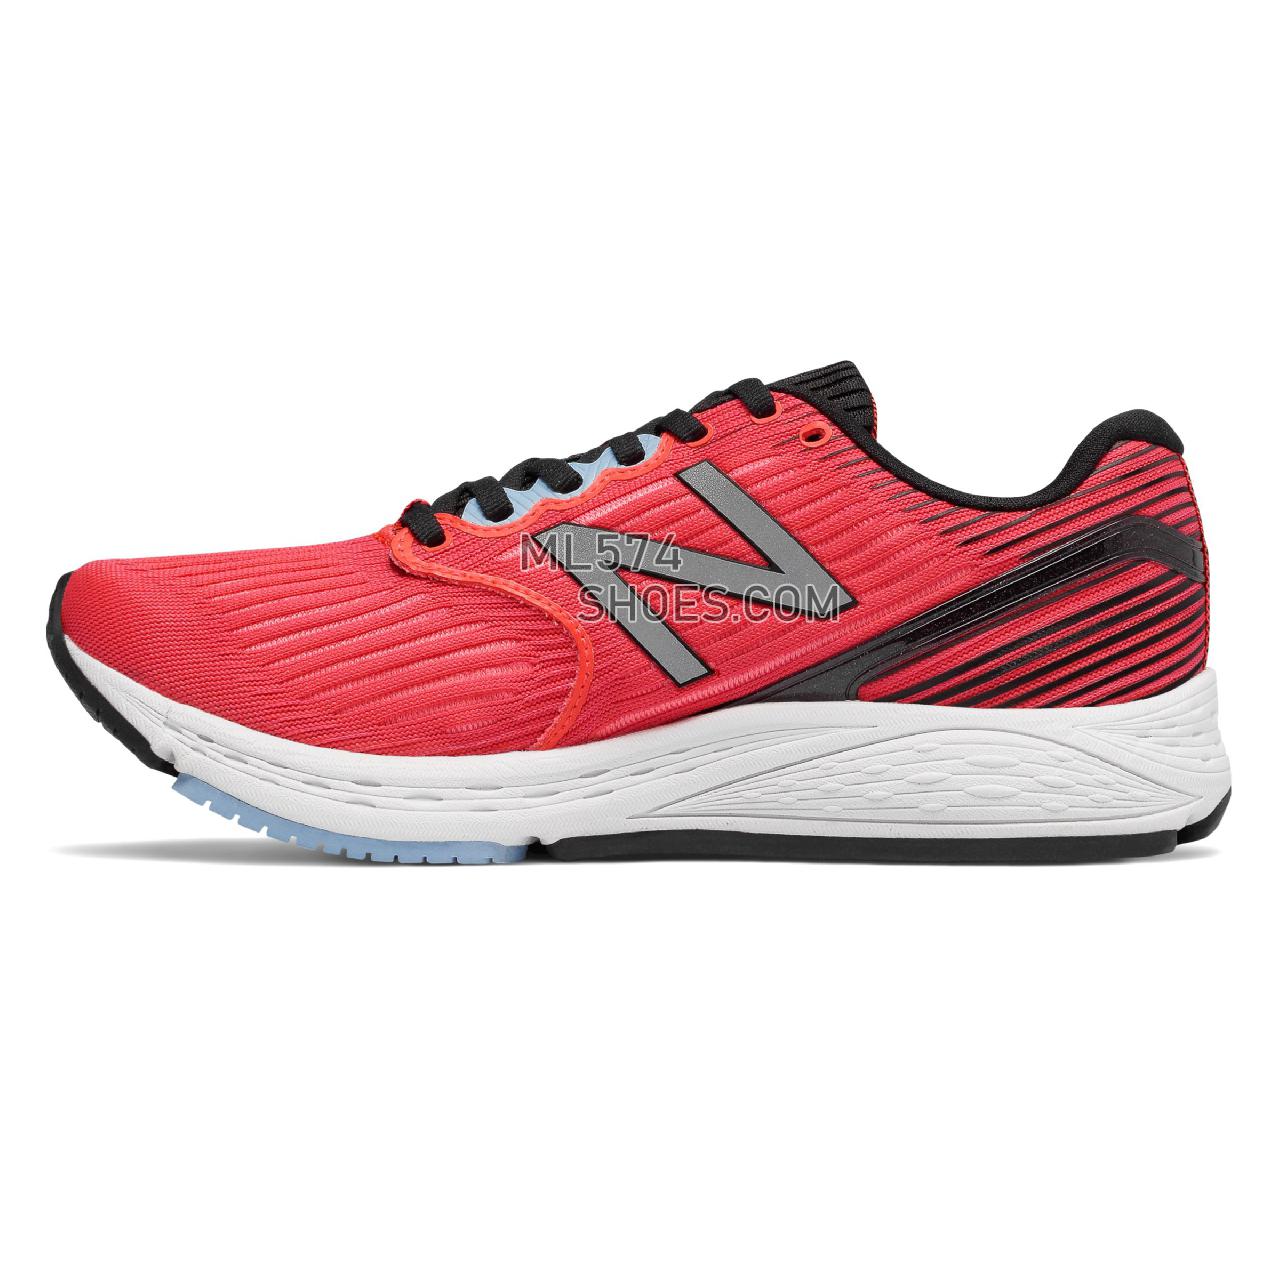 New Balance 890v6 - Women's 890 - Running Coral with Black and Clear Sky - W890CB6